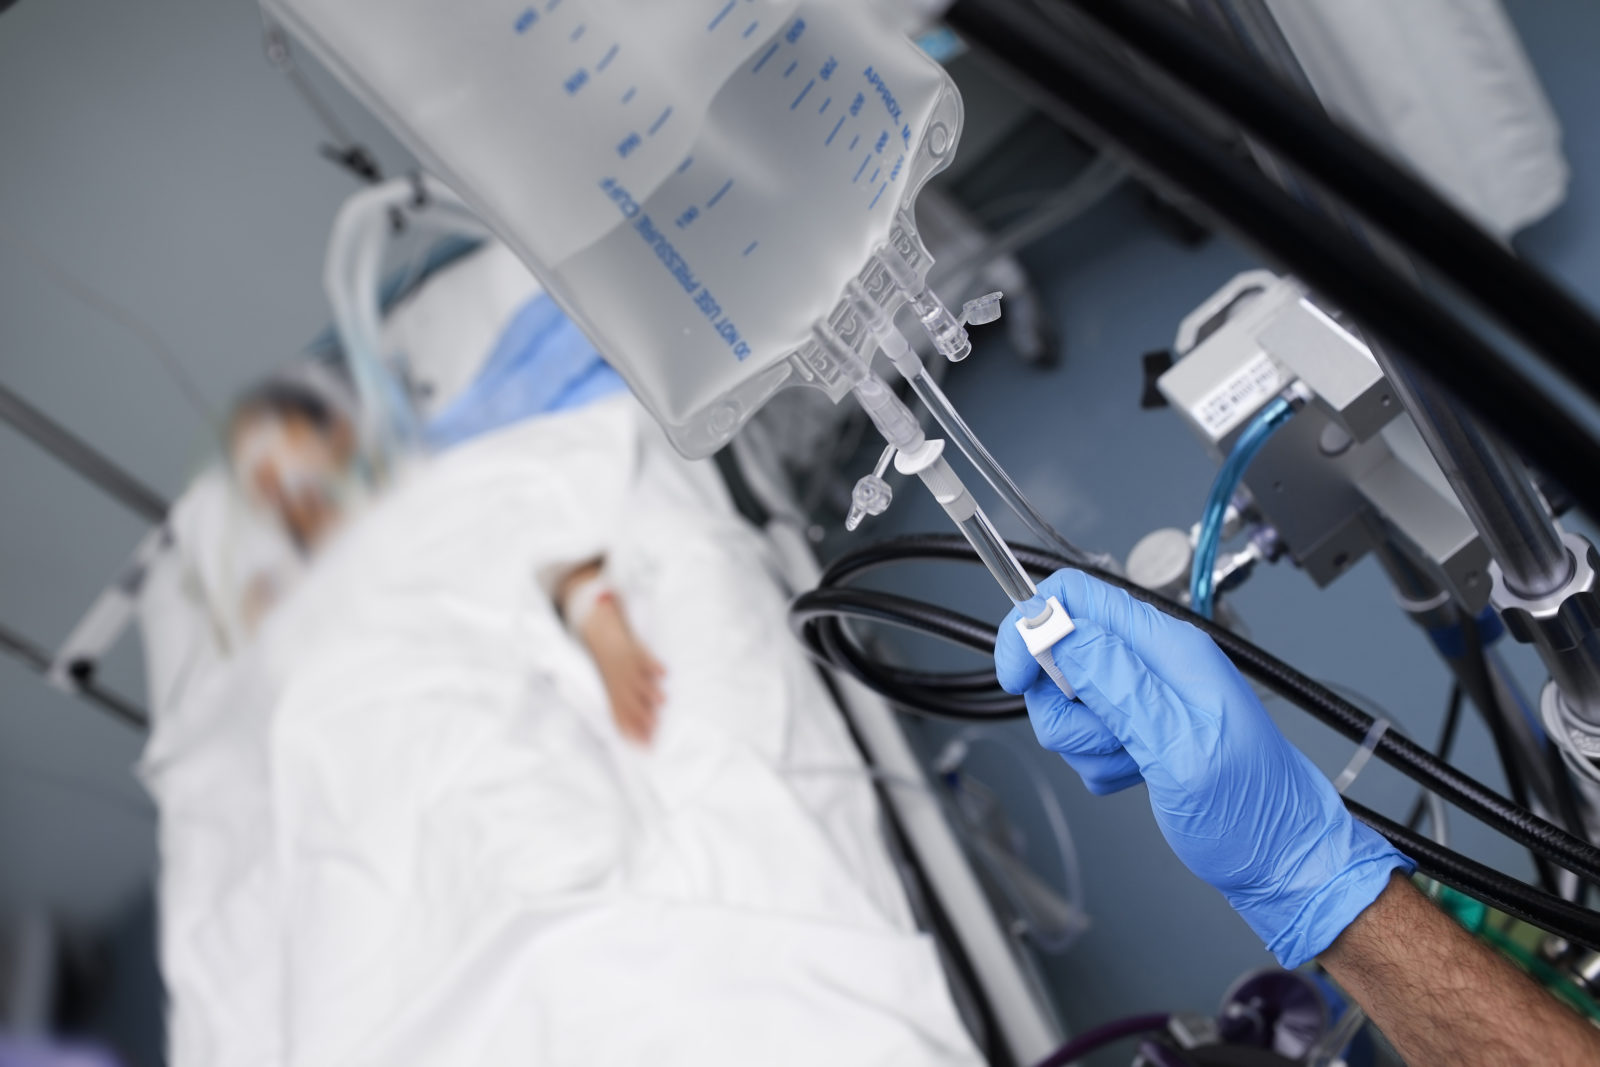 Male person with gloved hand turns off the intravenous drug system to the unconscious patient